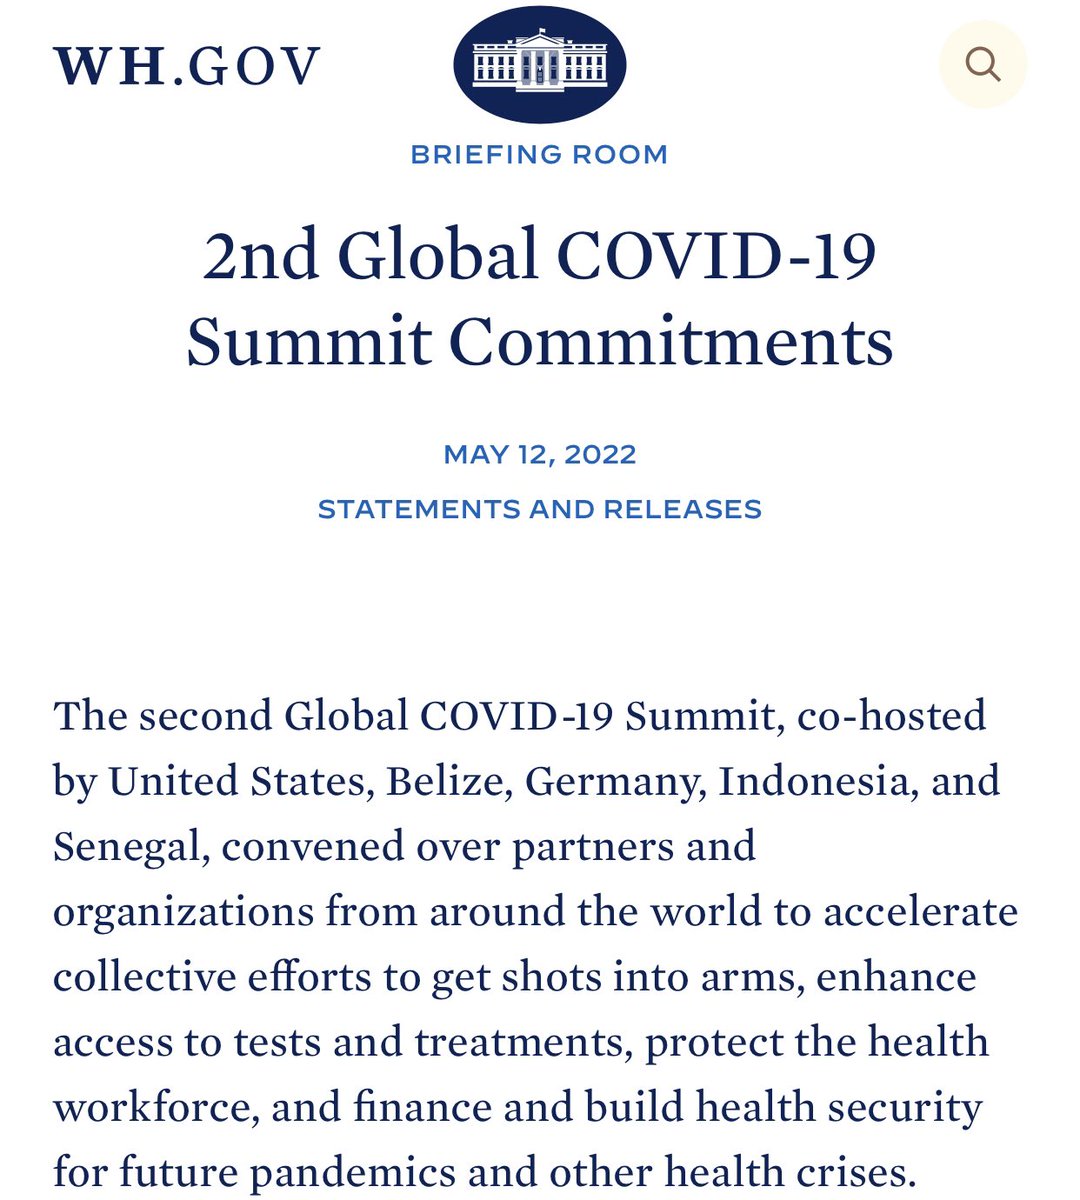 I noticed an interesting pattern during the #GlobalCOVIDSummit:

HIC donors often pledged traditional health security solutions (vaccines, surveillance).

LMICs often noted gaps in health systems (CHWs, services, equity).

Both are urgently needed, but are we *really* listening?